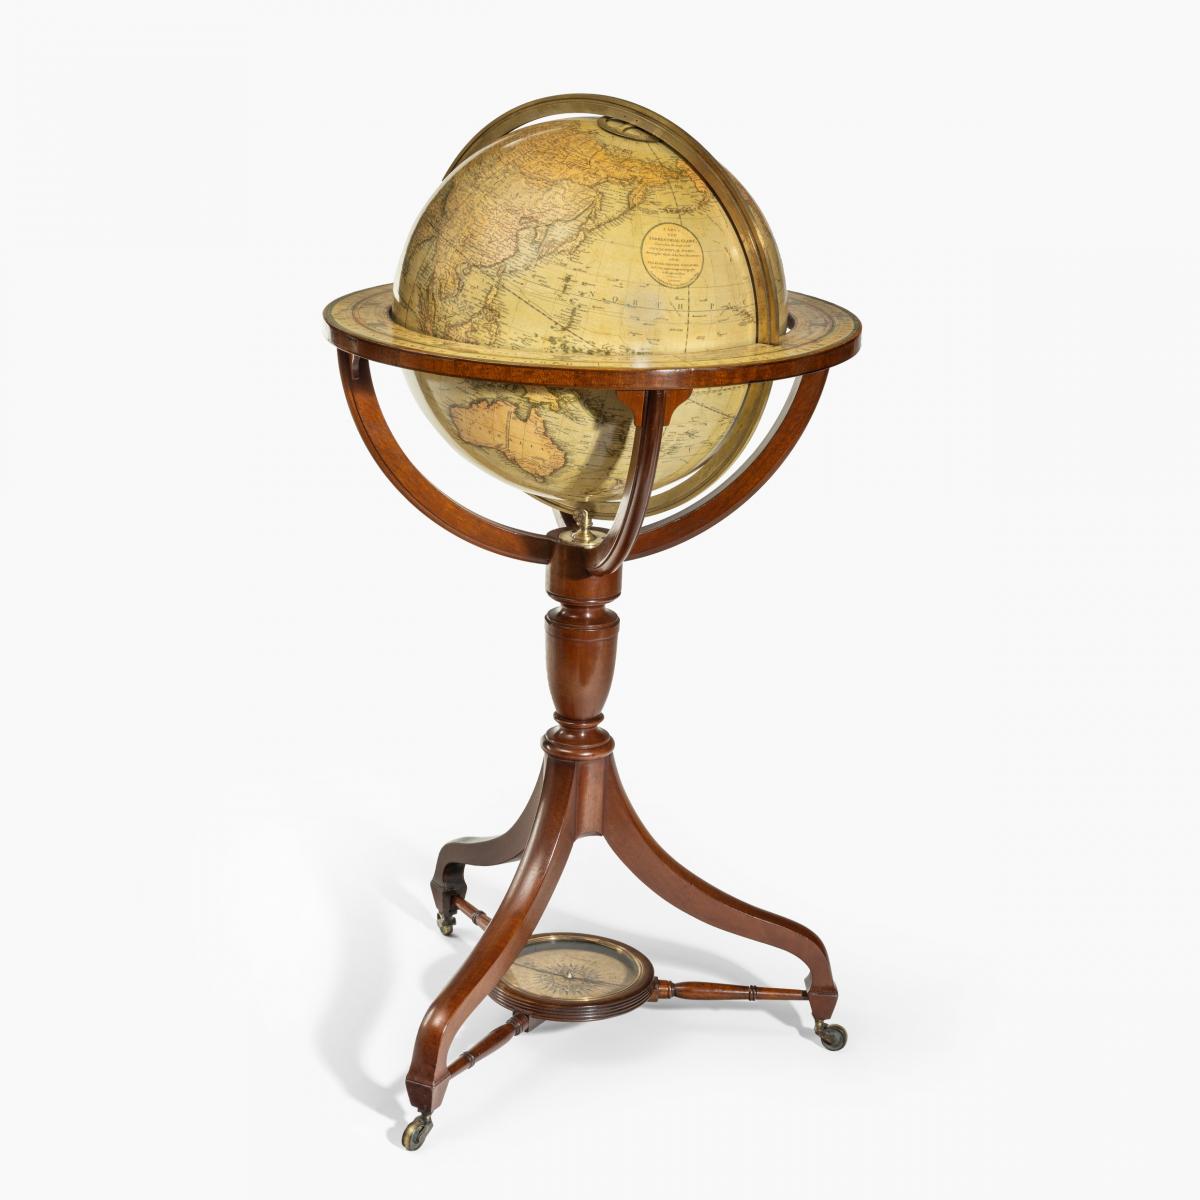 A George IV 18-inch floor-standing library globe by John Smith